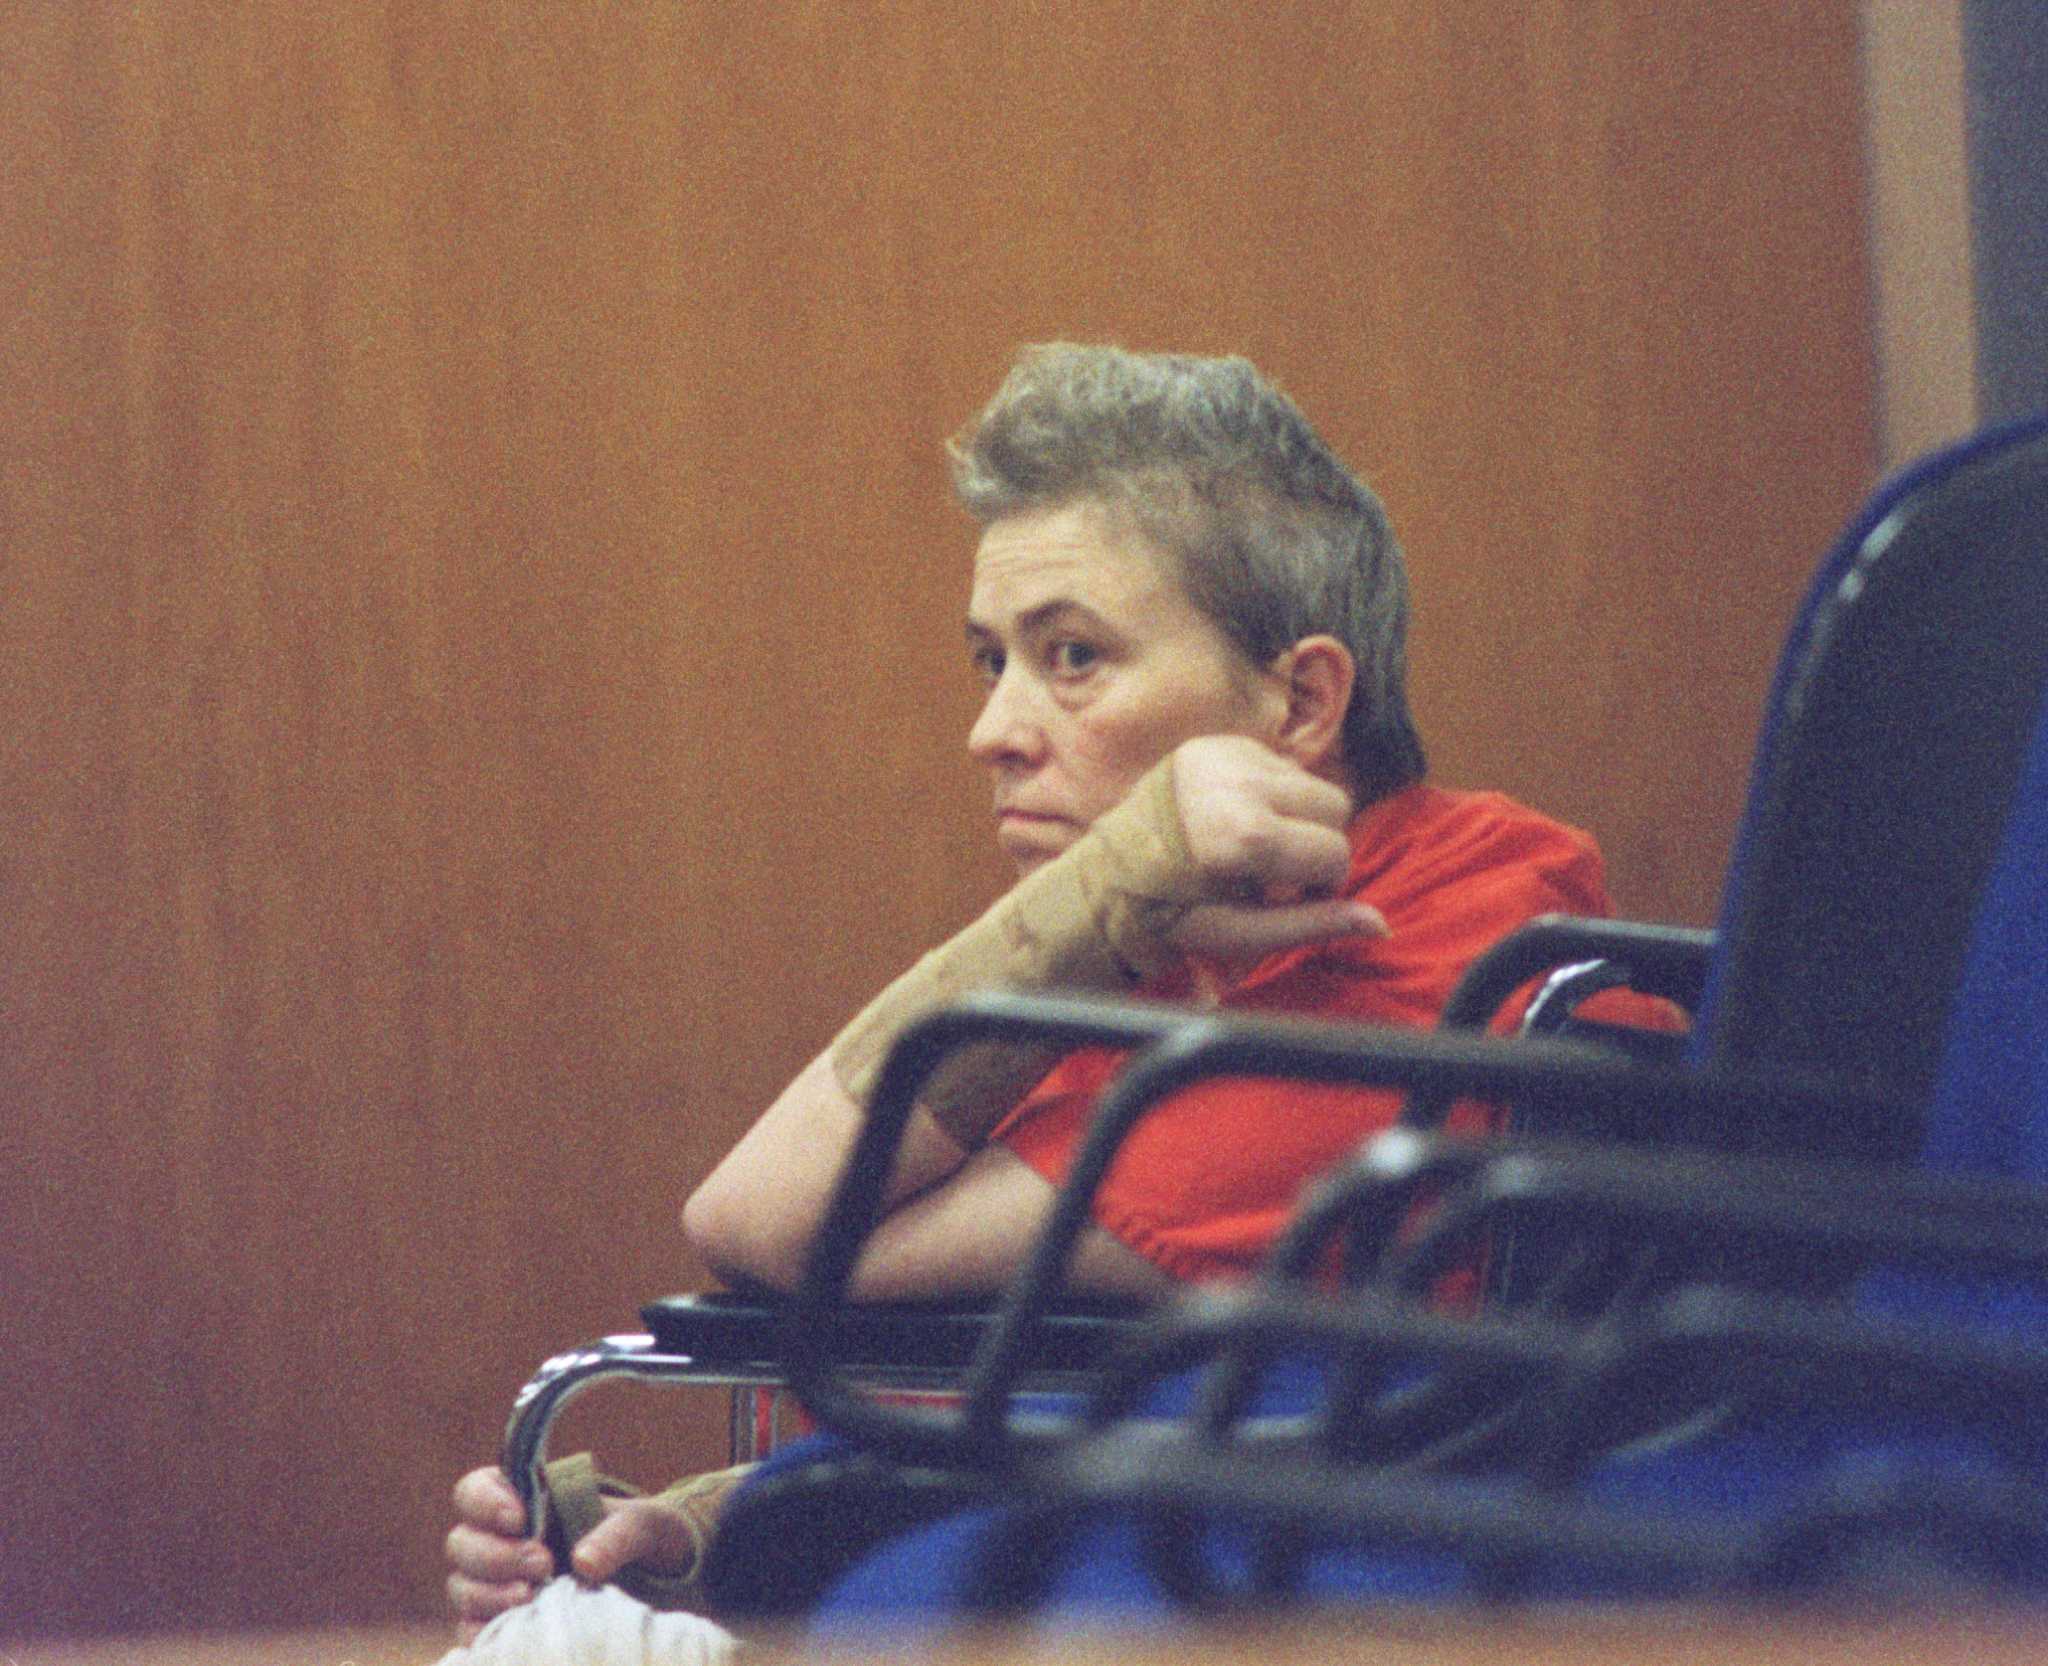 Sue Basso, Susan Basso, Suzanne Basso O'Malley - CONTACT FILED:  SUSAN BASSO

Susan Basso in 232nd District Court. She is the alleged ringleader of a group that abducted, tortured and beat to death a mentally retarded man.  Basso is in a wheelchair, has lost 215 pounds since she has been in jail, and is quite sickly. HOUCHRON CAPTION (05/13/1999): Suspect Susan Basso makes a court appearance on Wednesday.